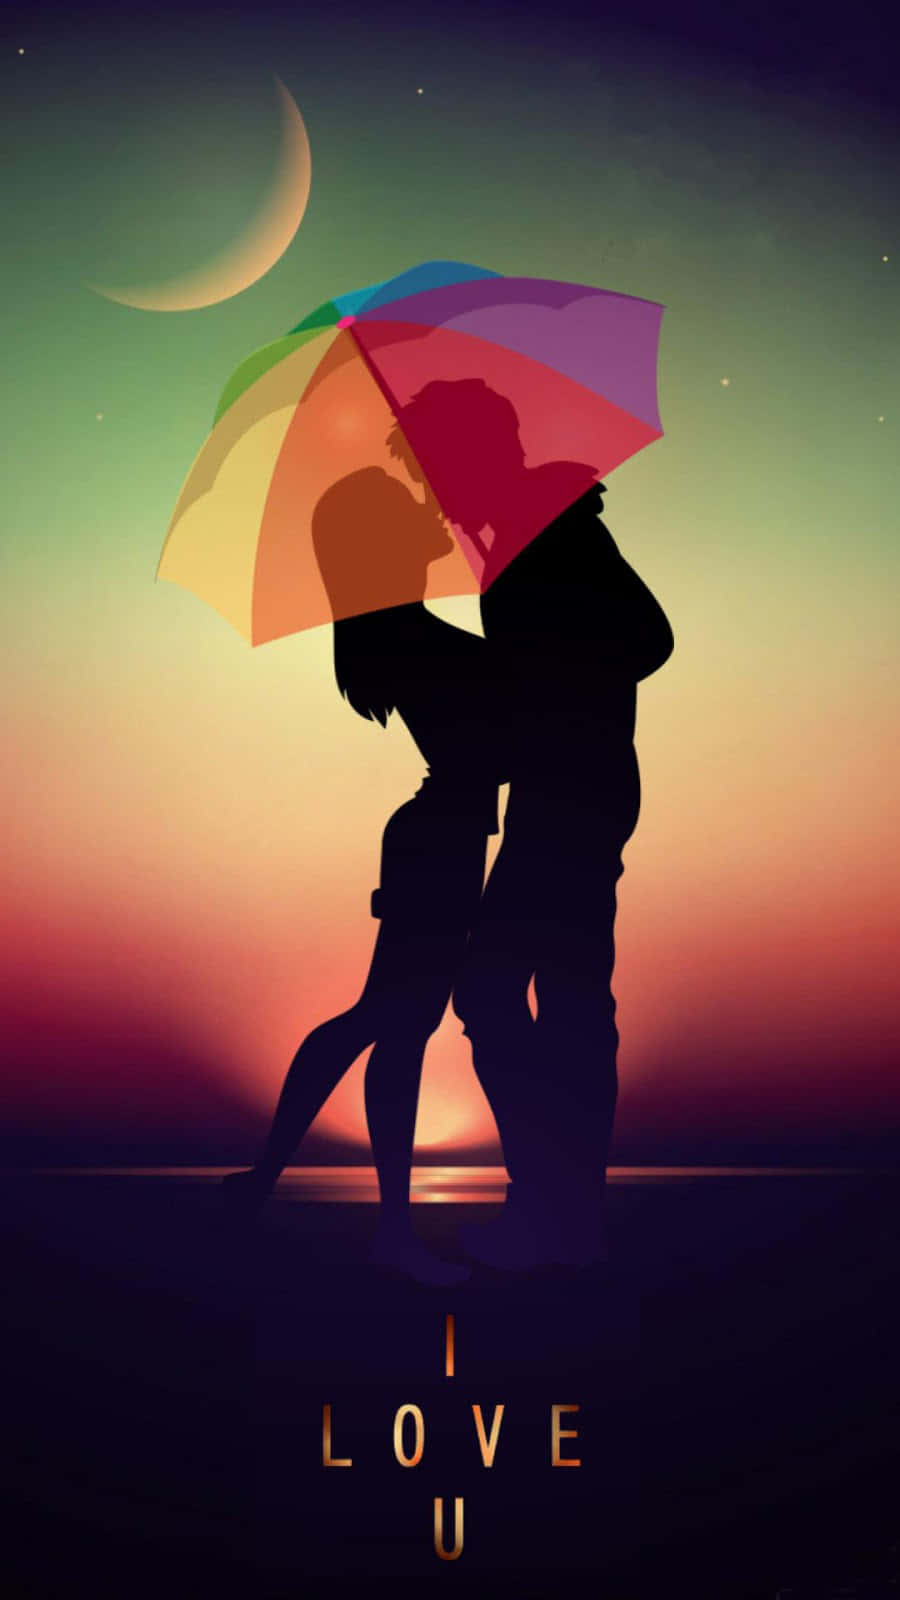 Romantic I Love You Silhouette Cover Background